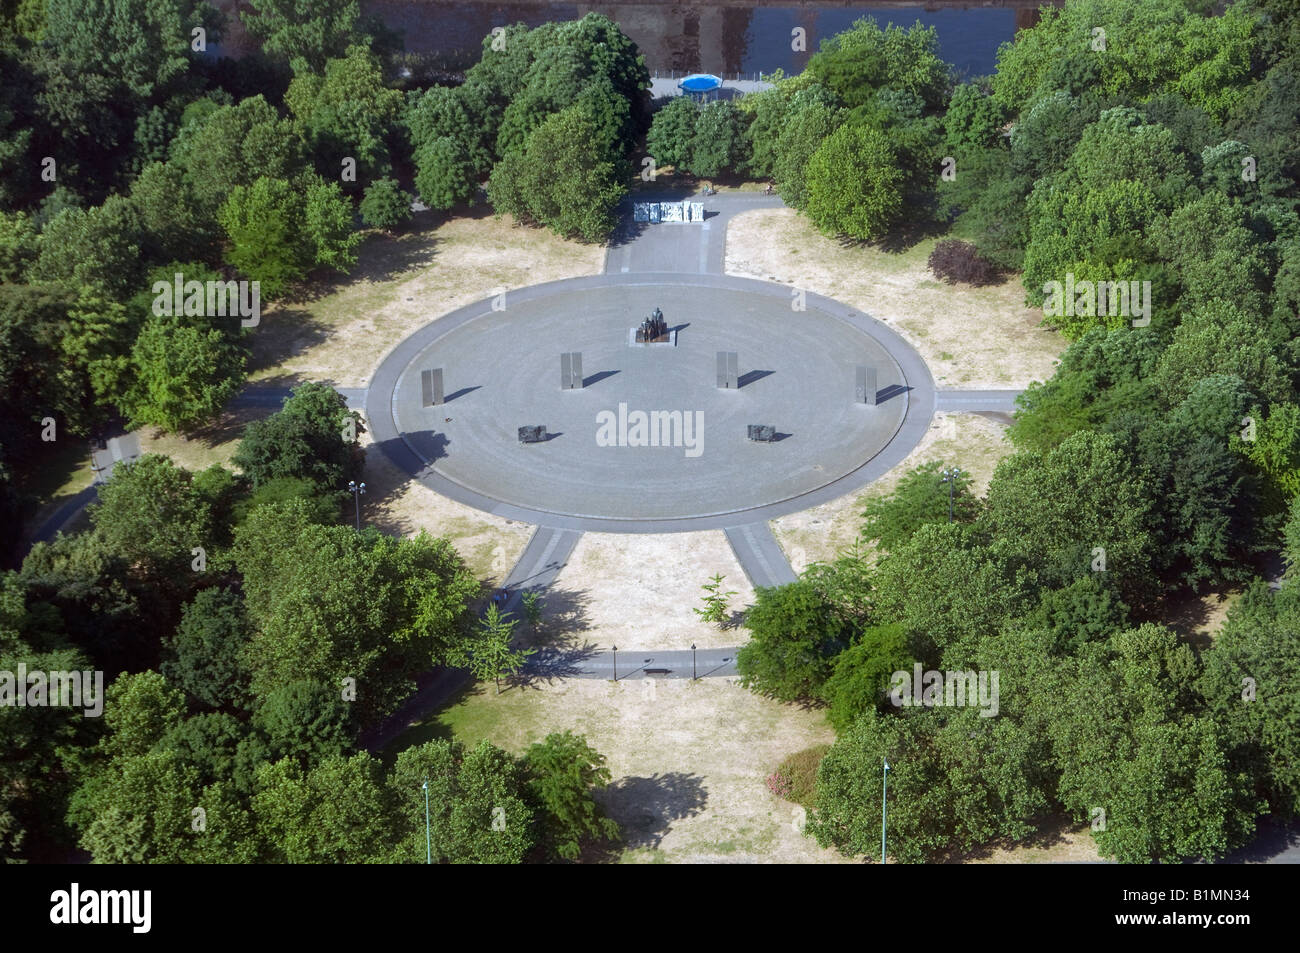 Aerial view of Marx Engels Forum public park in Mitte Quarter Berlin Germany Stock Photo